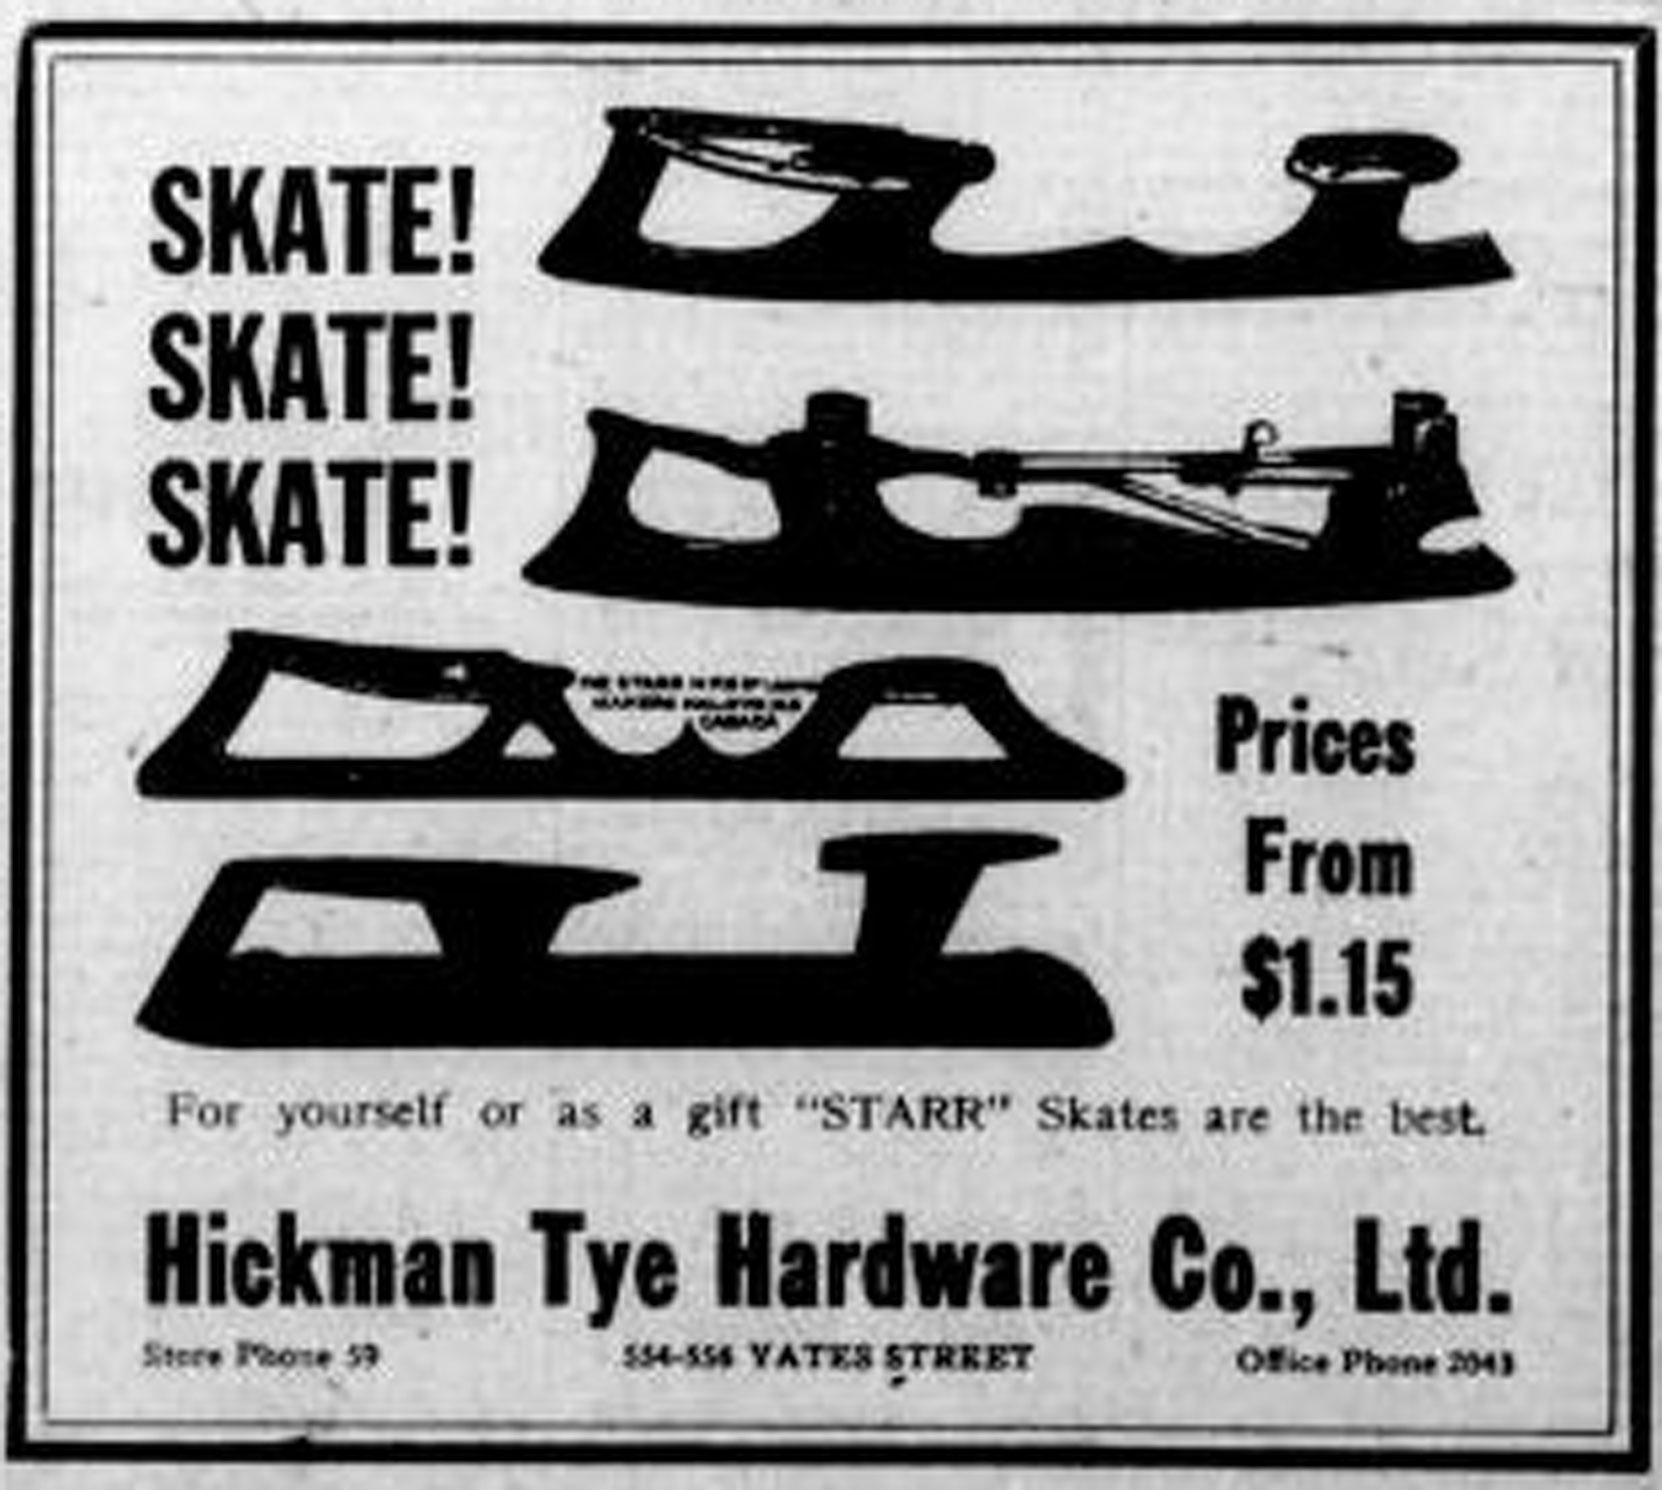 1925 advertisement for Ice Skates at Hickman Tye Hardware Co., 554-558 Yates Street (Victoria Online Sightseeing Tours collection)